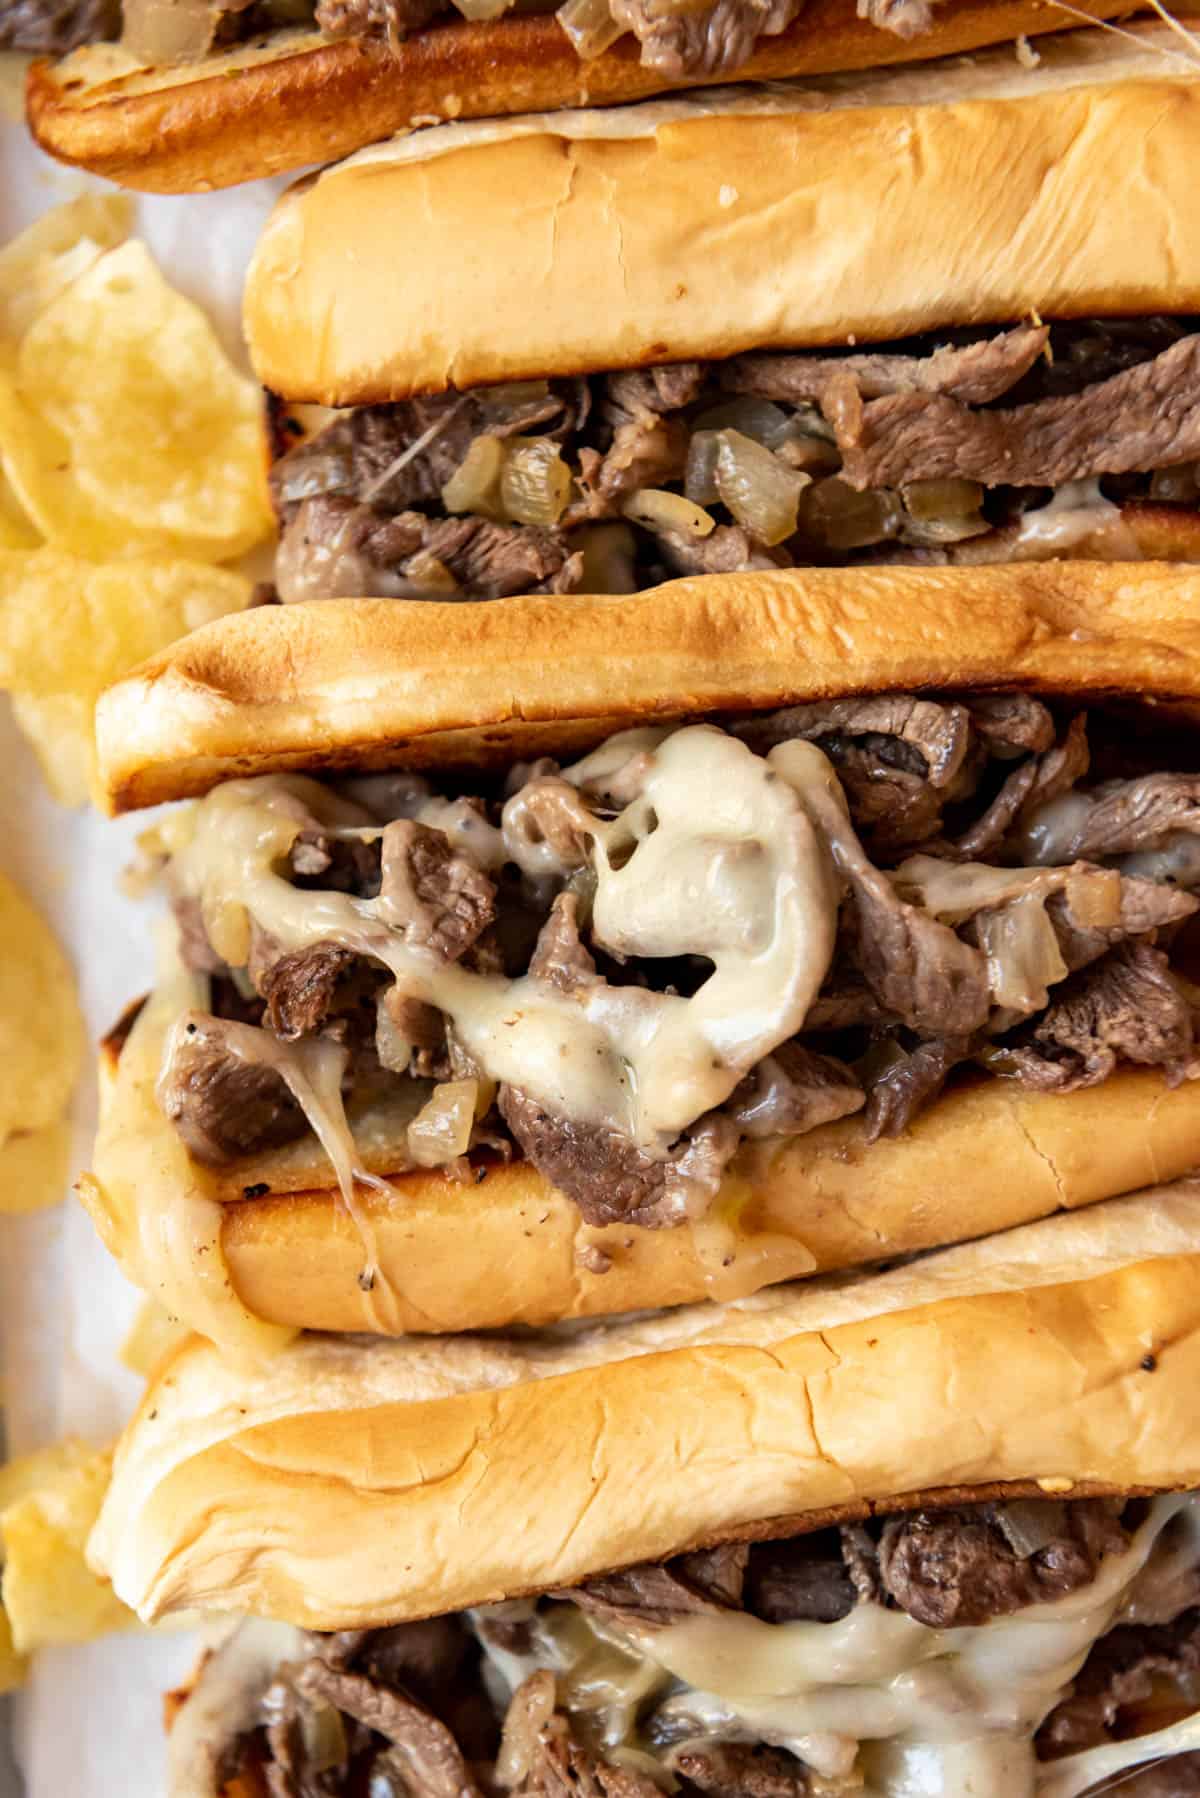 A close image of Philly Cheese Steaks.